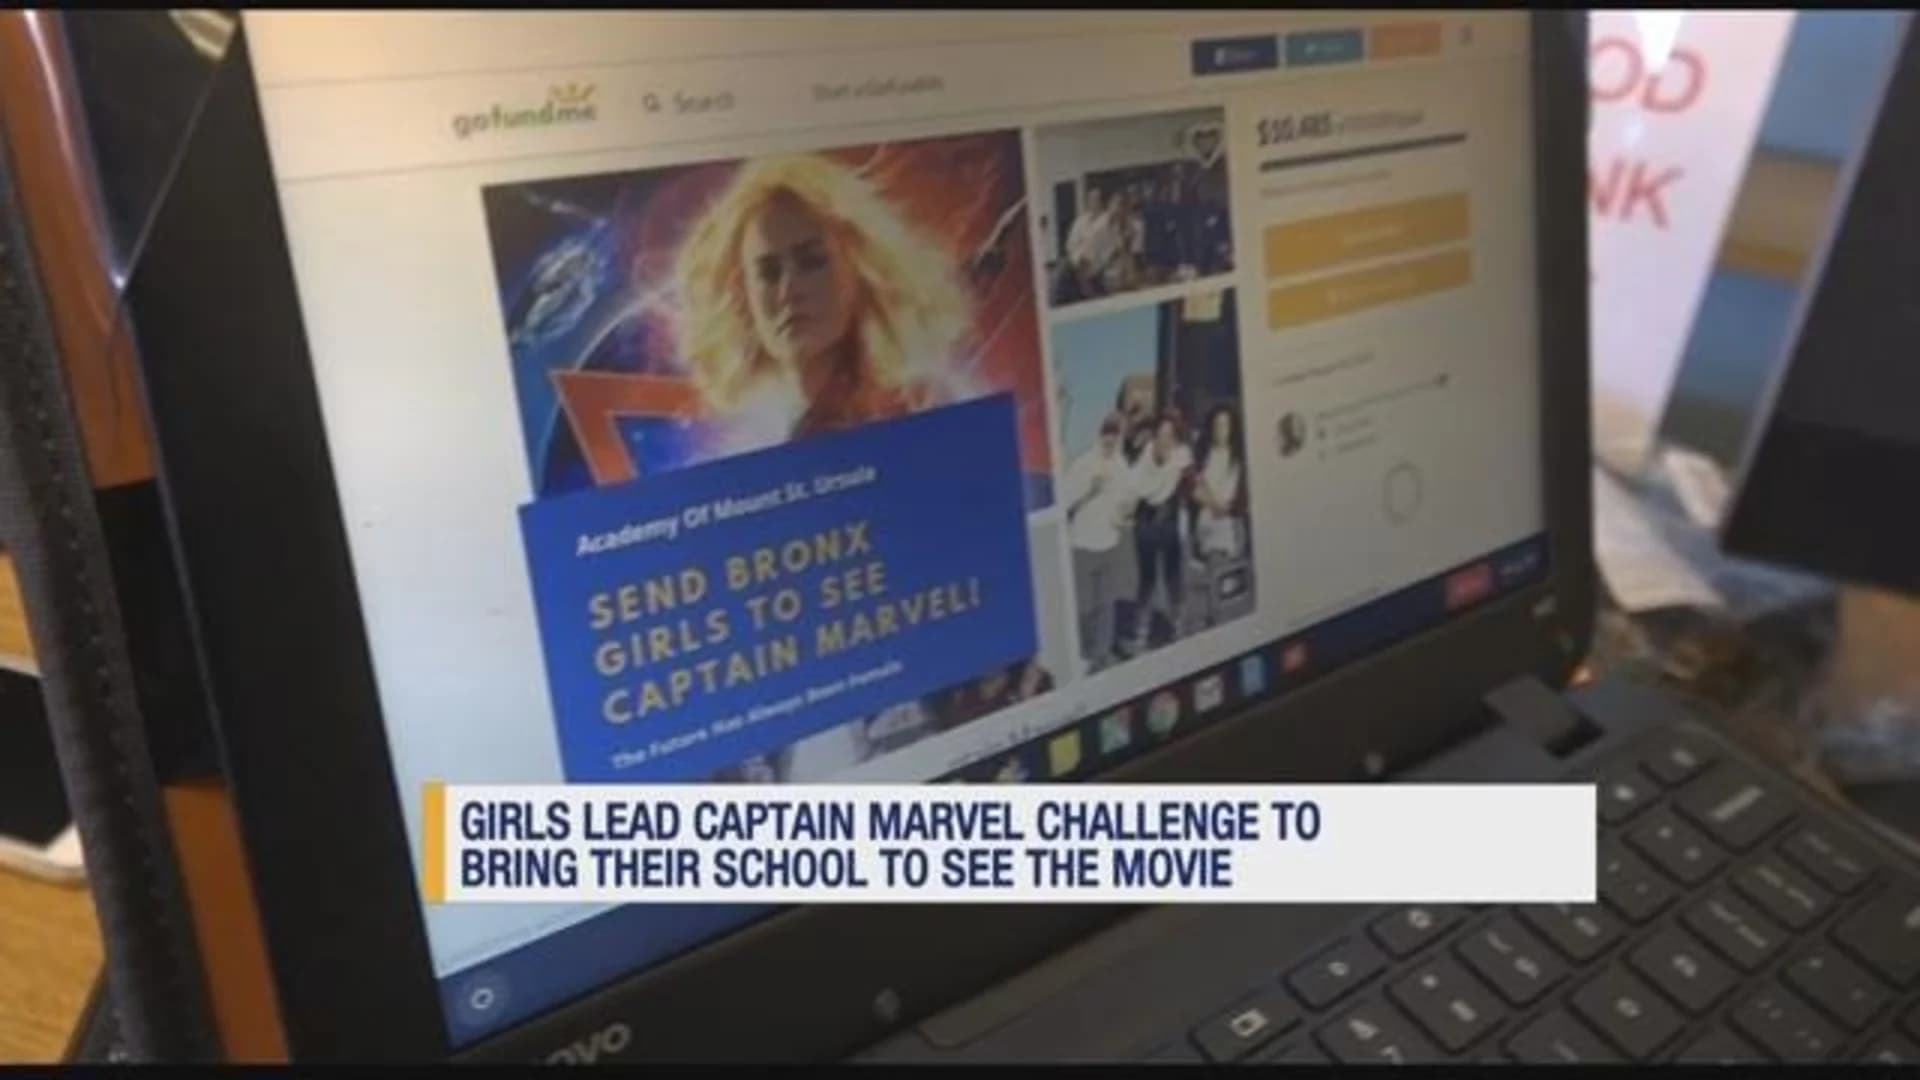 Marvelous: Club raises enough funds to take entire school to movie